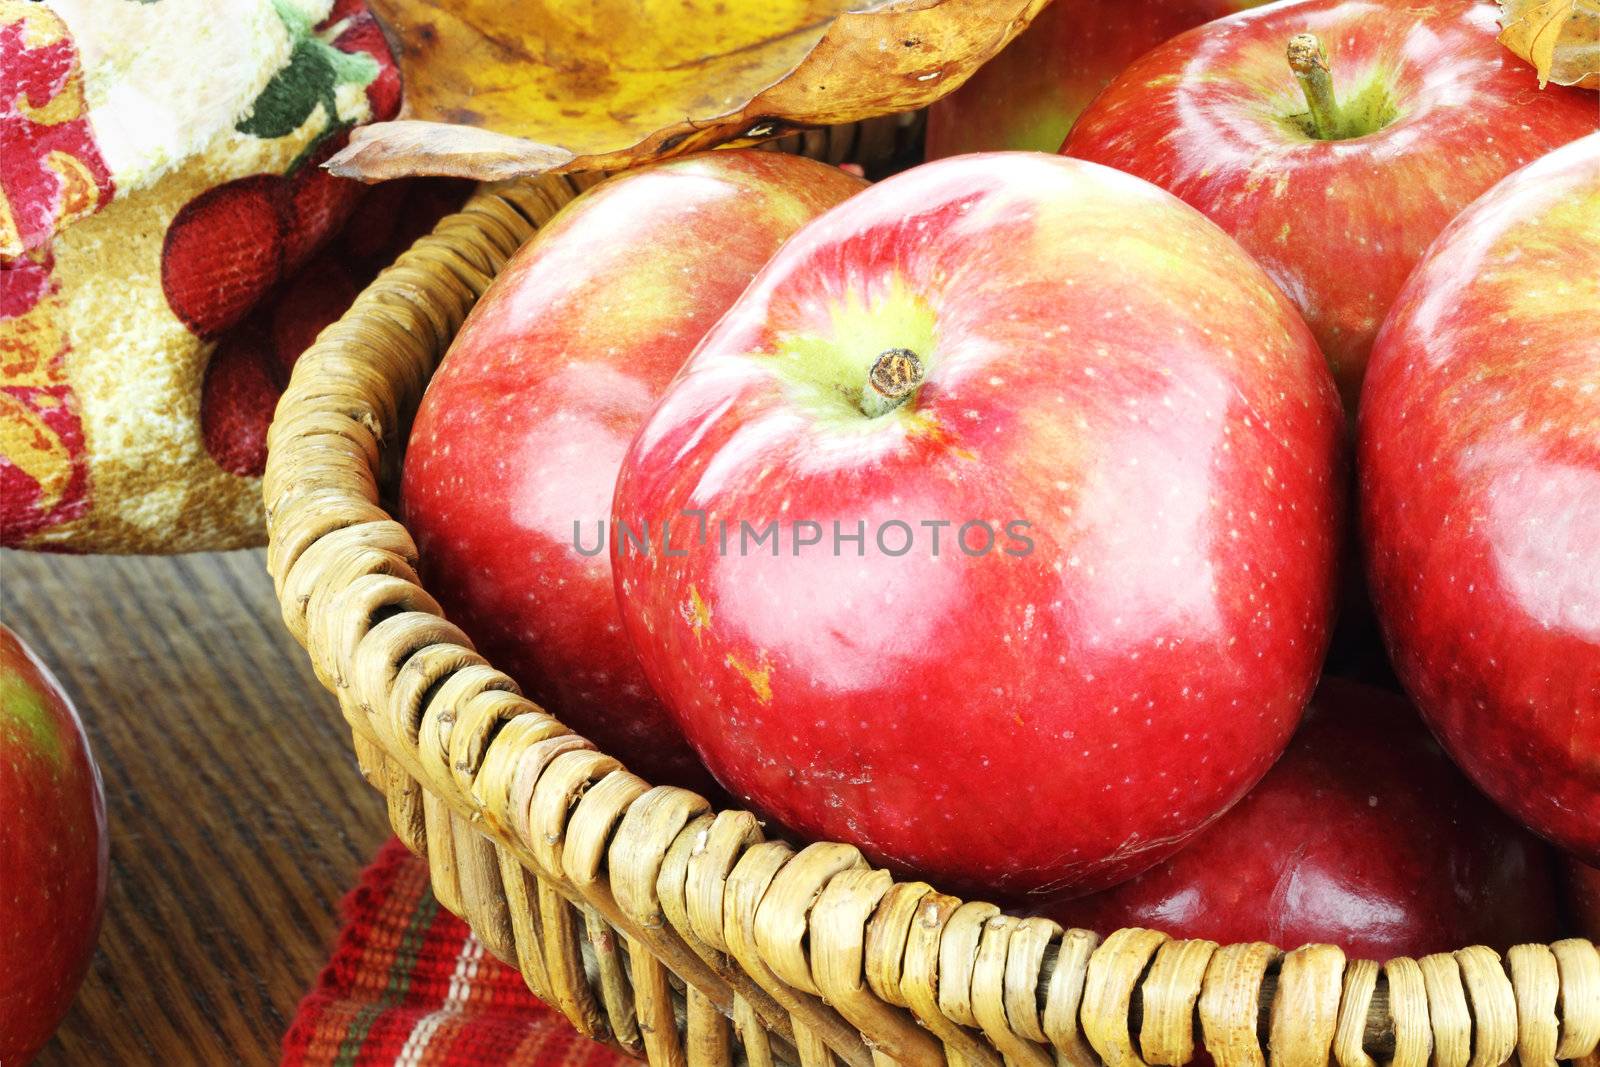 Basket of freshly picked organic red apples and autumn leaves.
